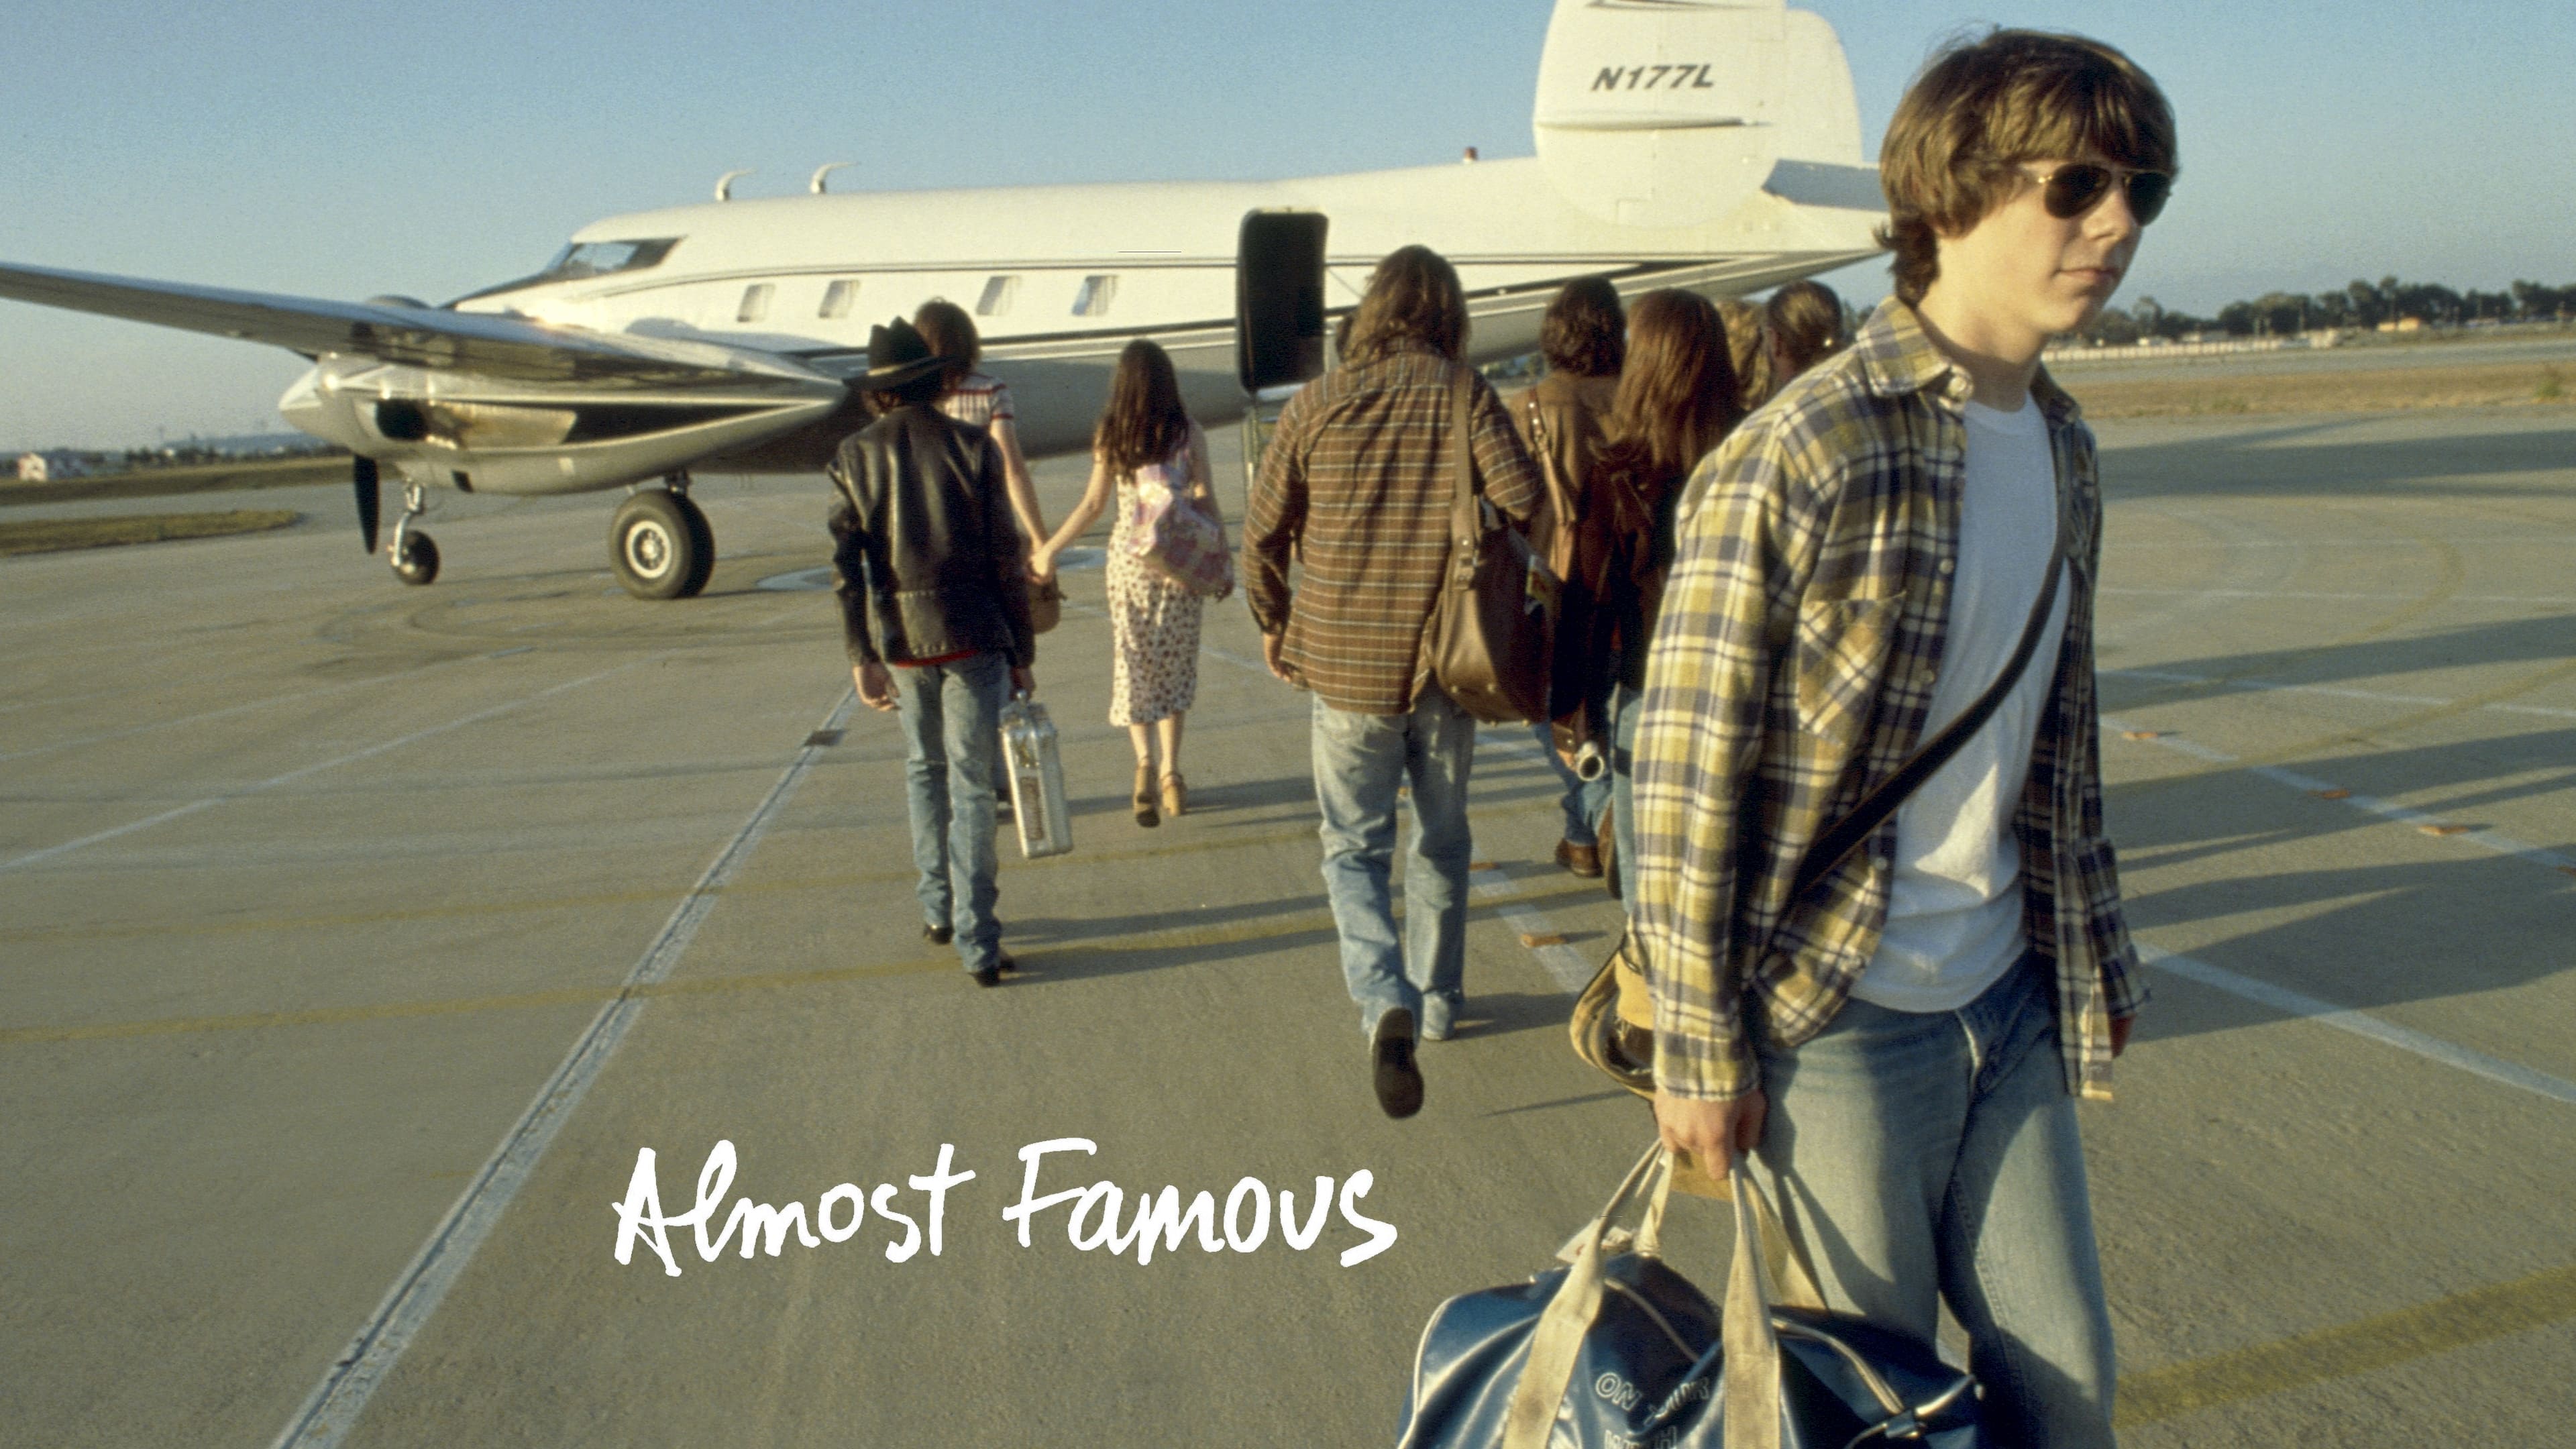 Almost Famous (2000)